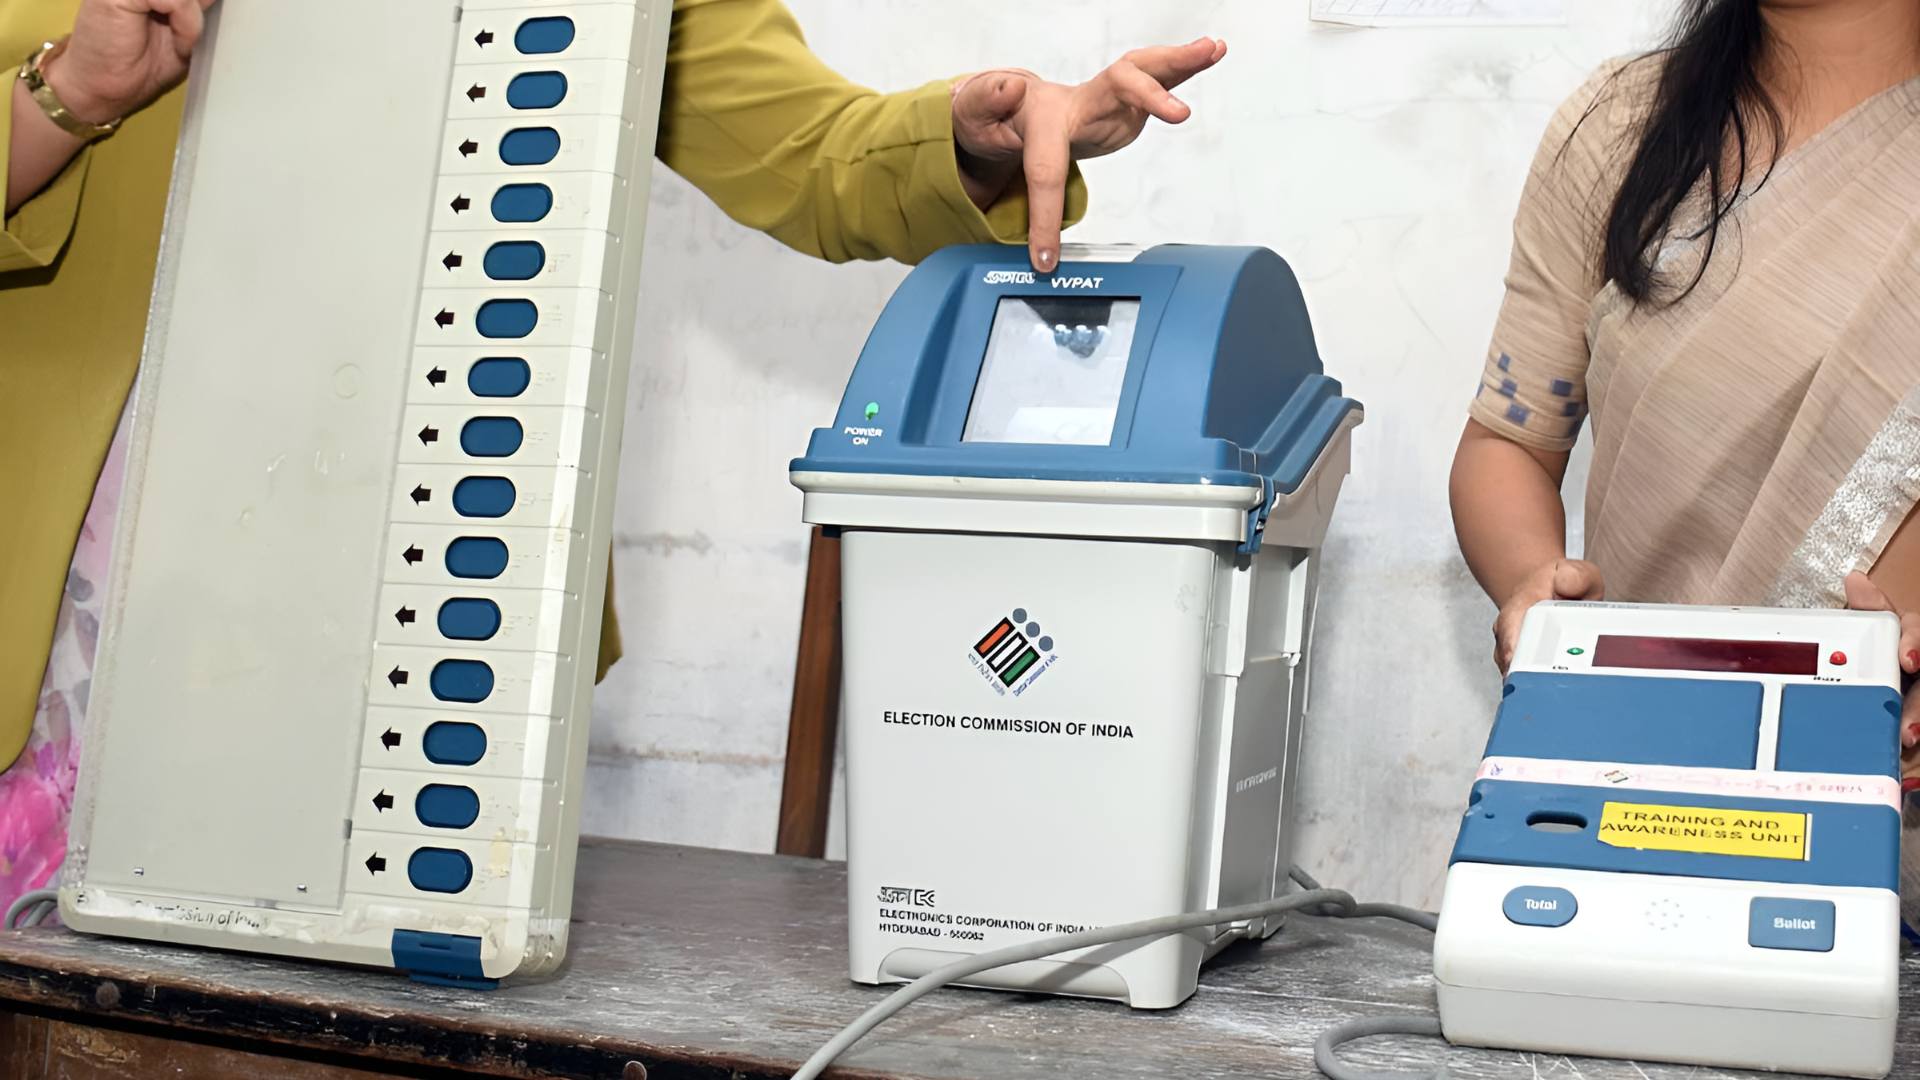 Supreme Court Directs On EVM, What Is The Case? All You Need To Know